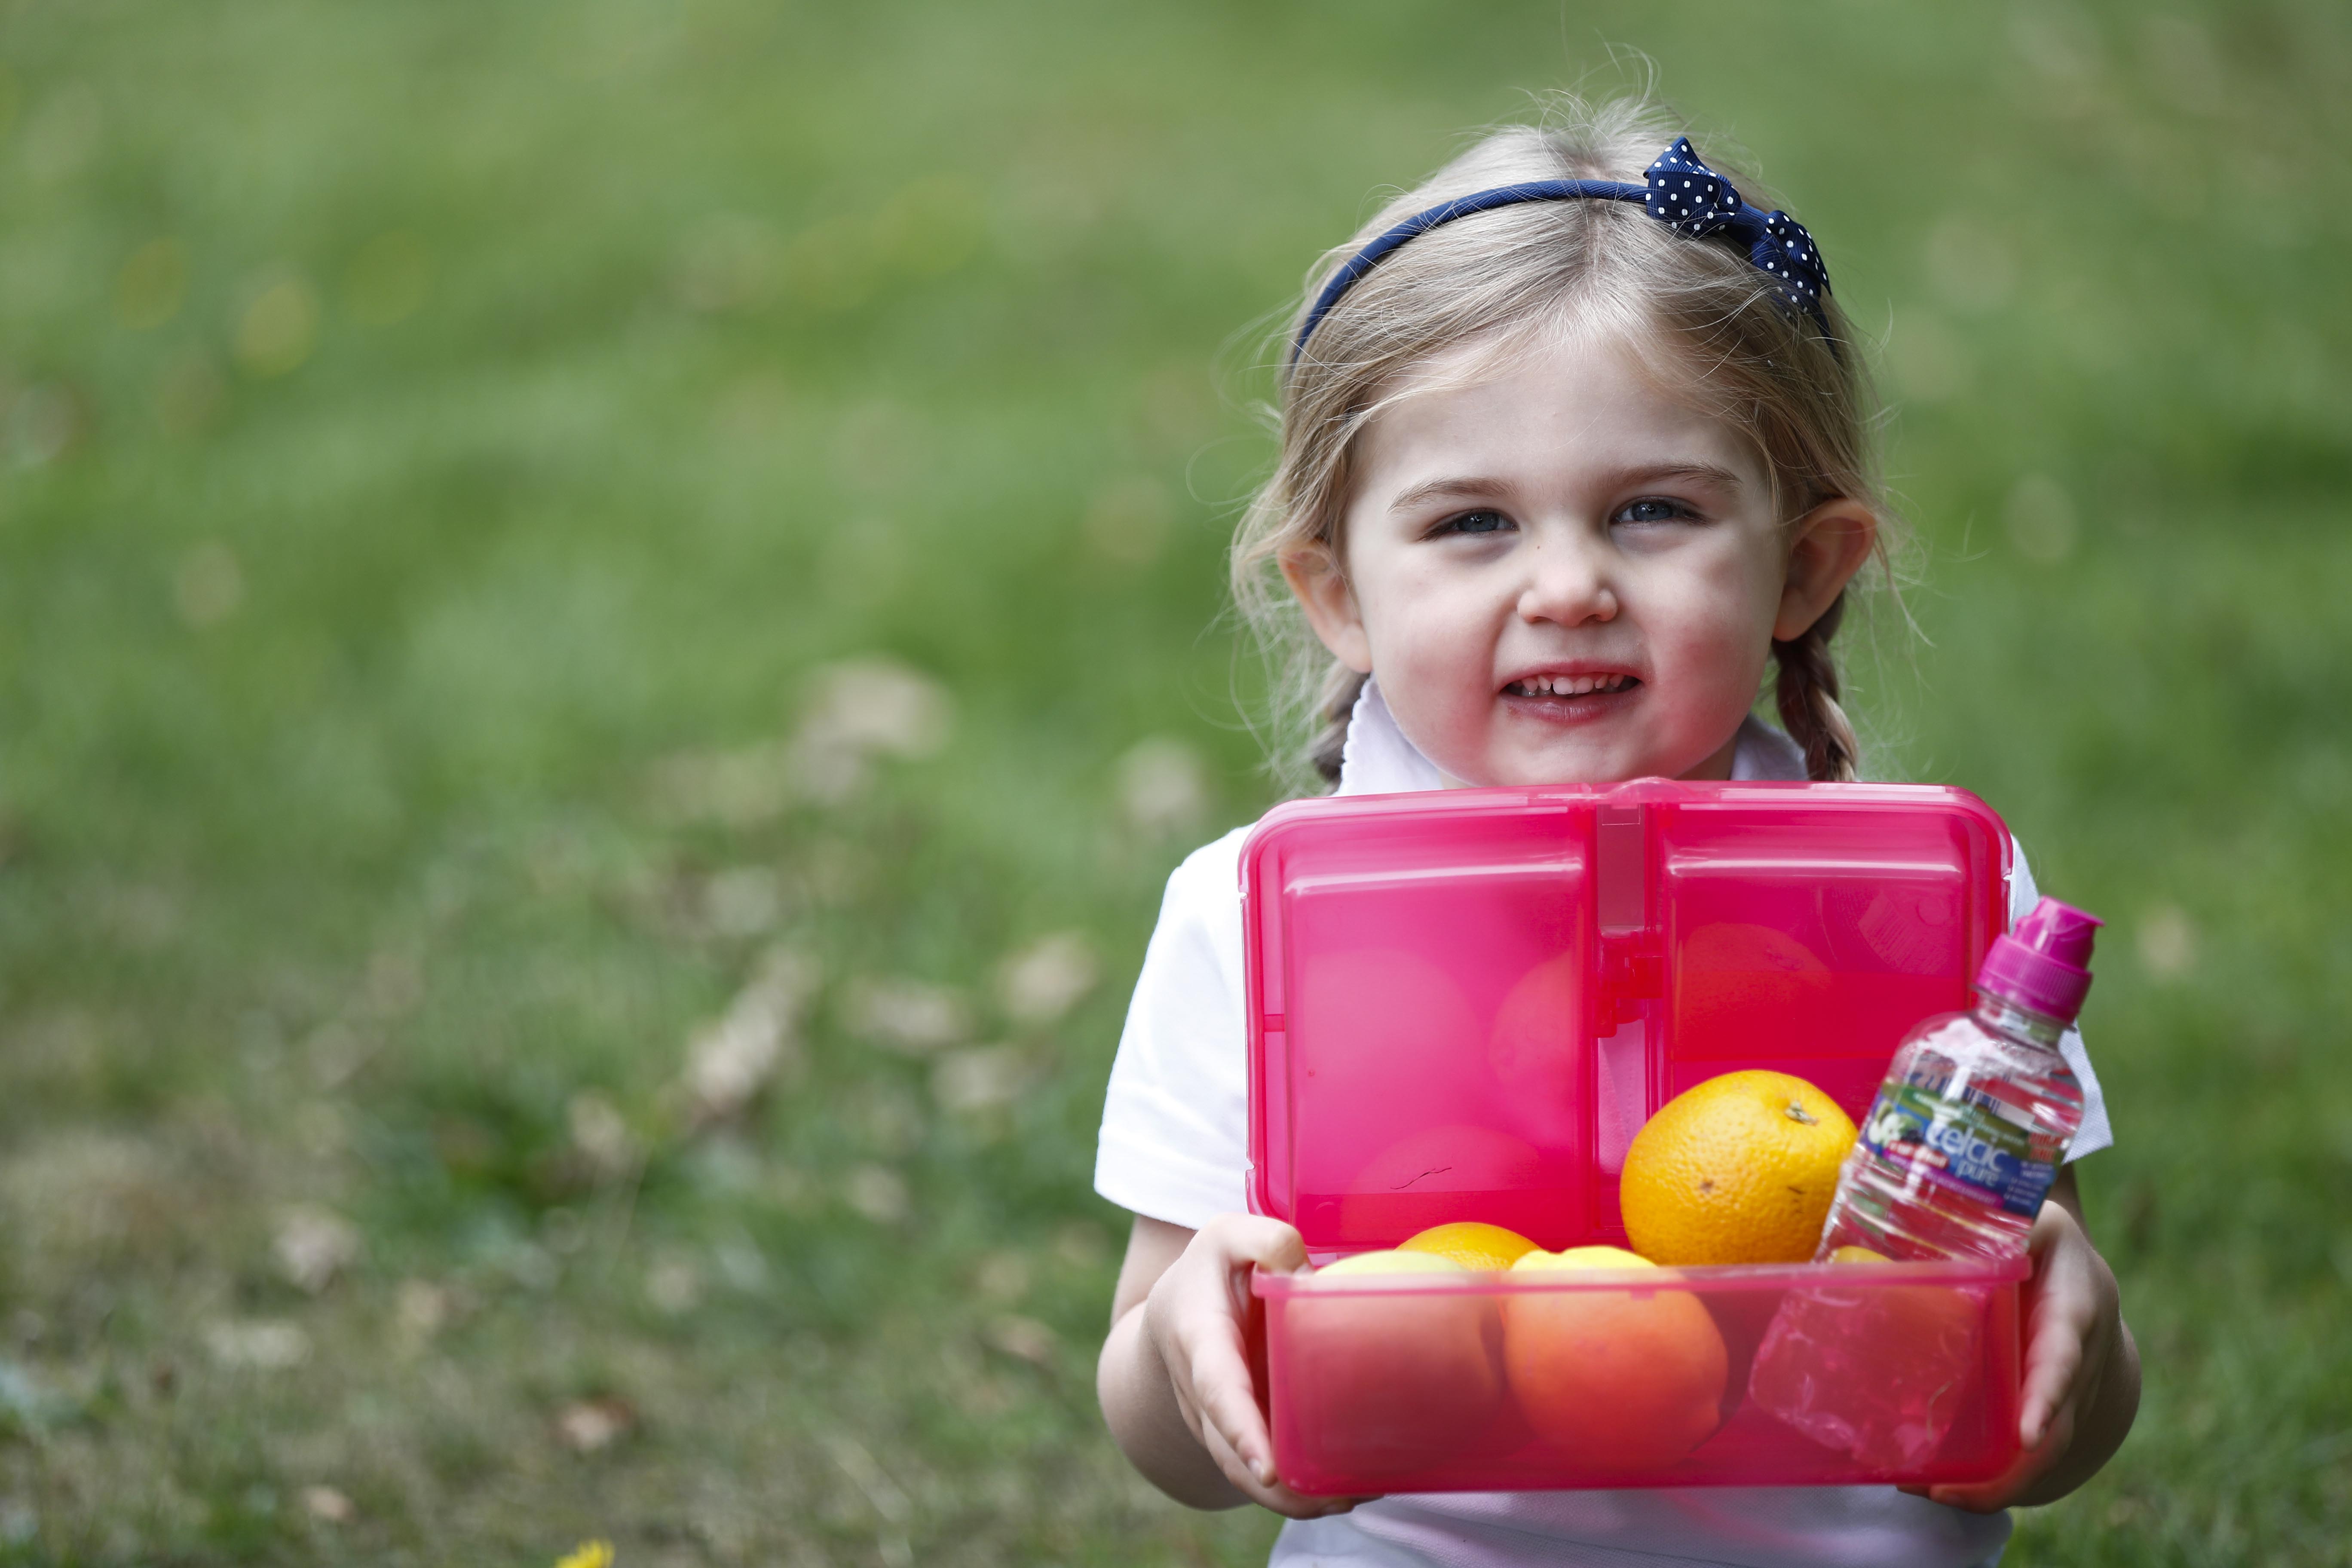 5 achievable lunchbox tips to consider now that we’re – FINALLY! – back to school